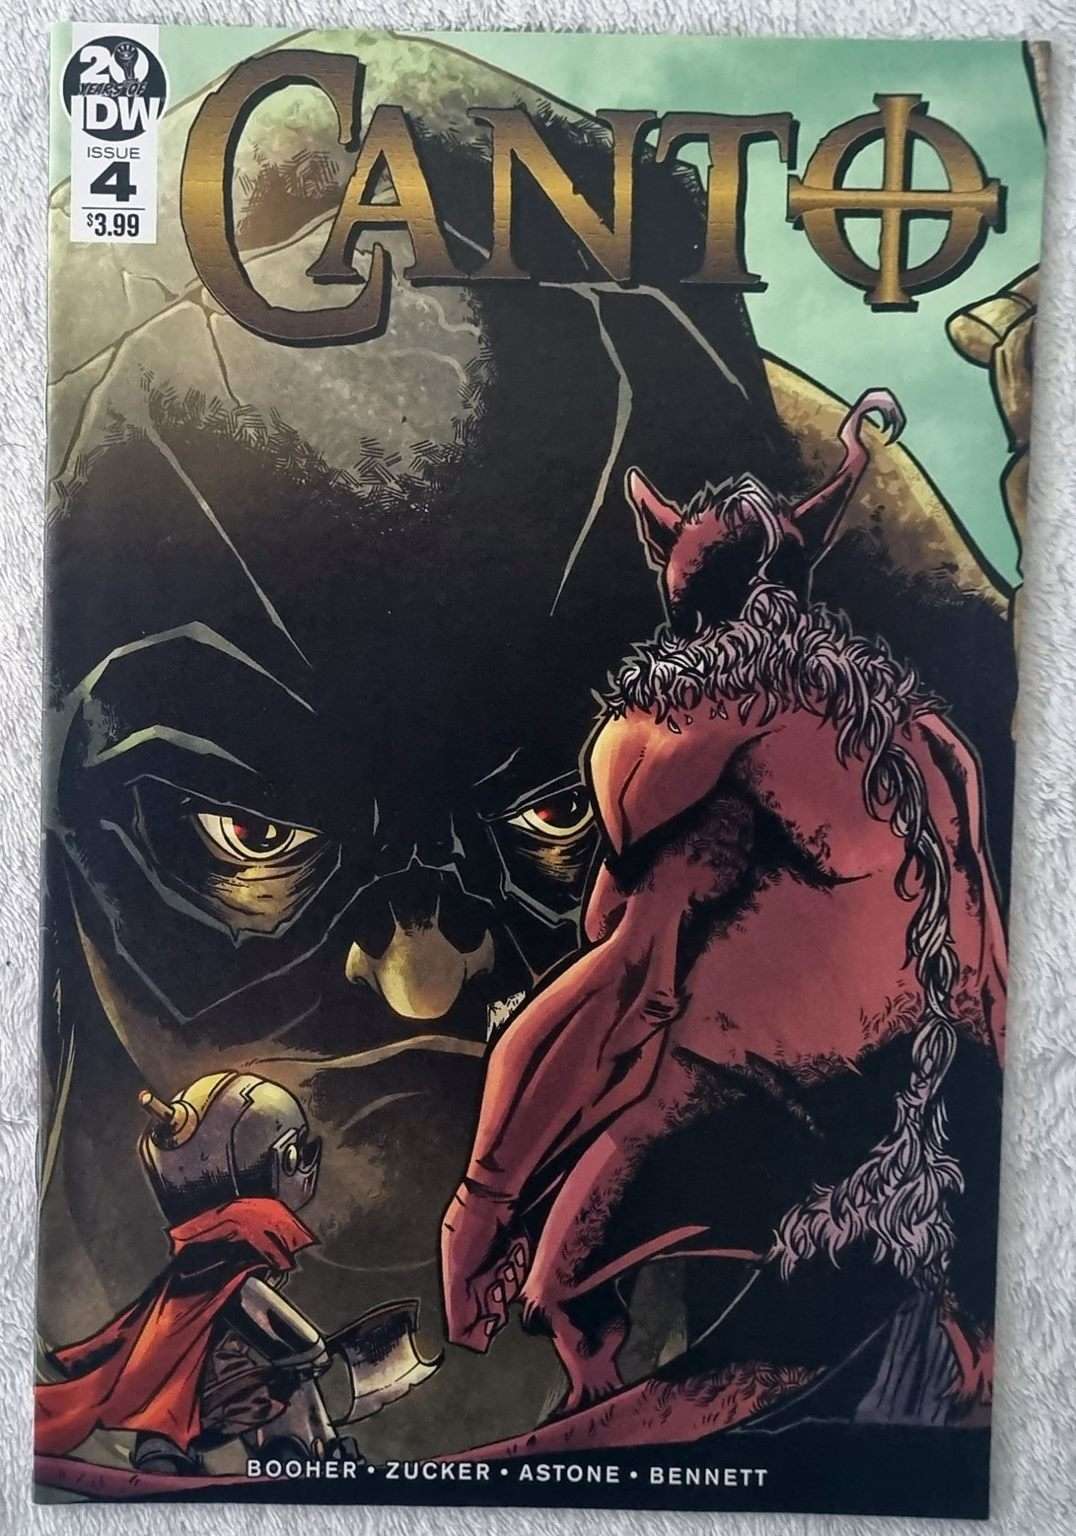 Canto #4 - NM (1st Print Variant)